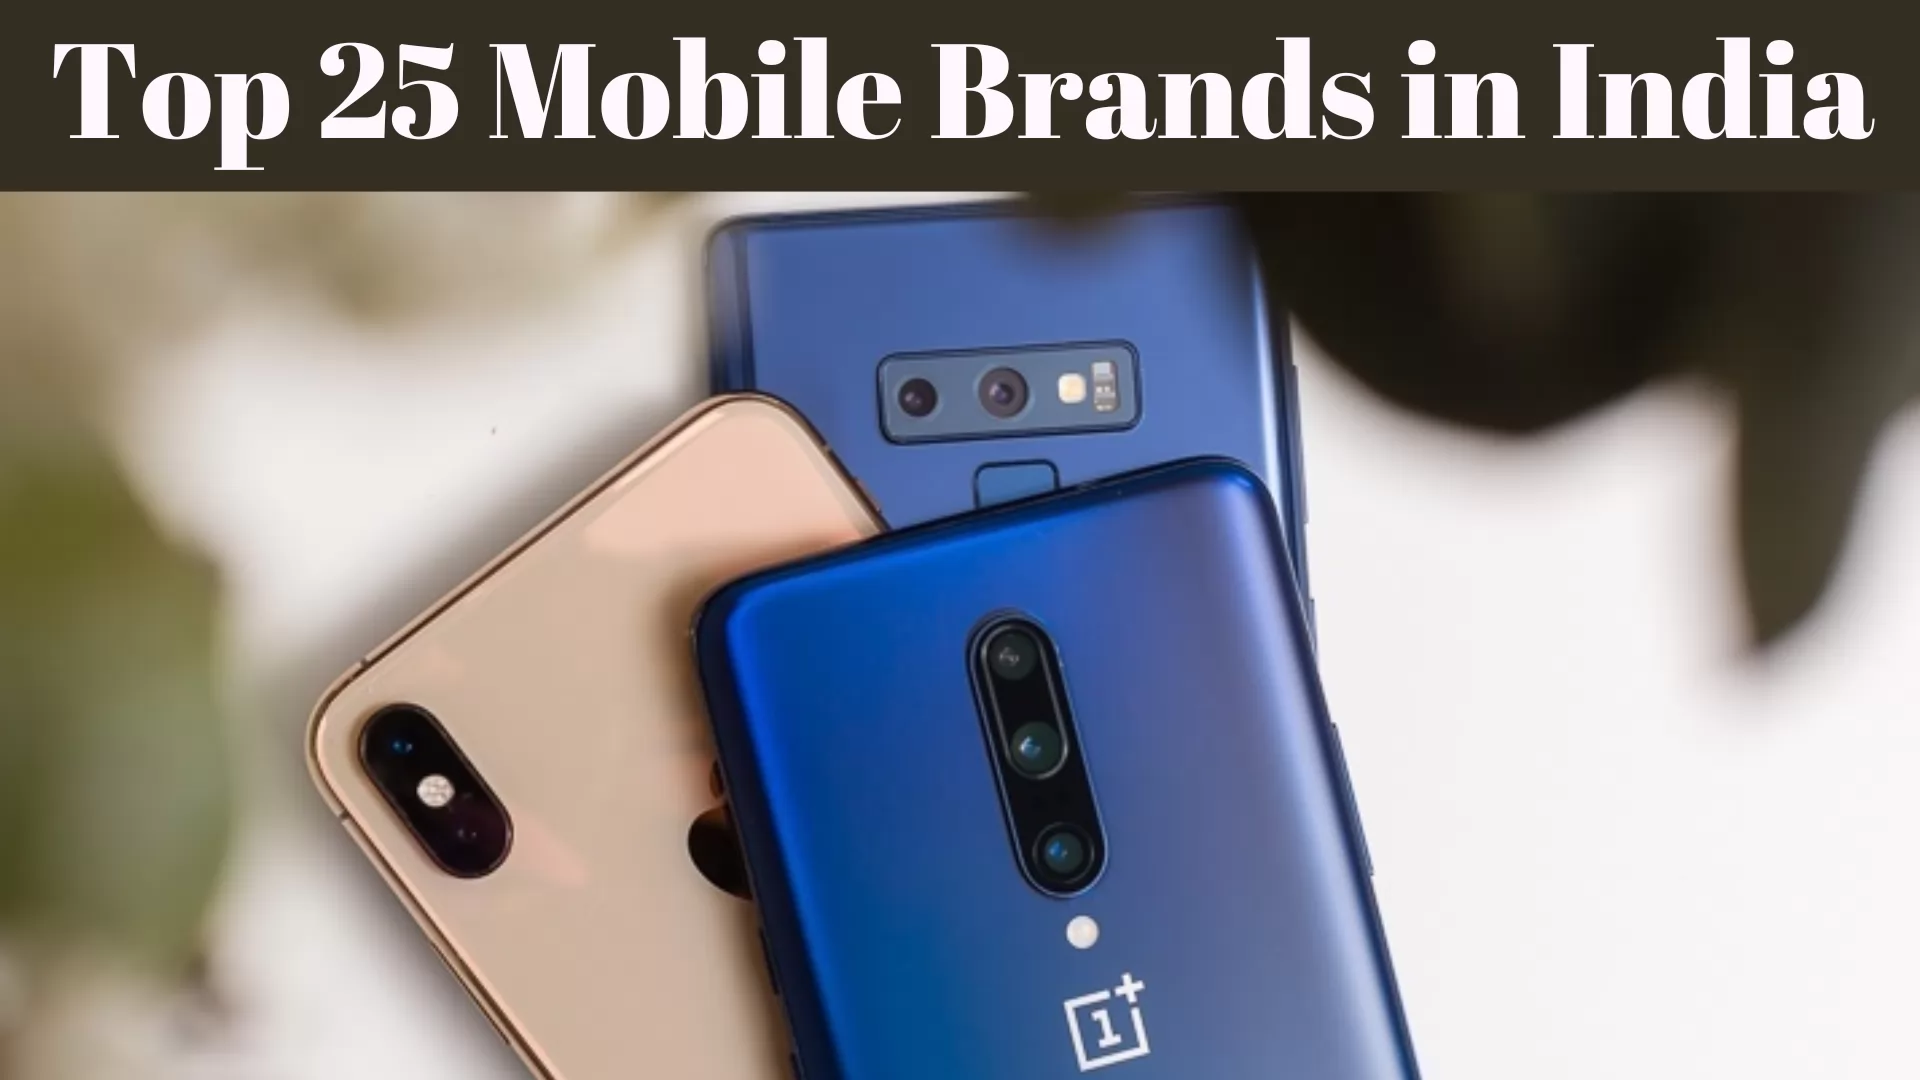 Top 25 Mobile Brands in India